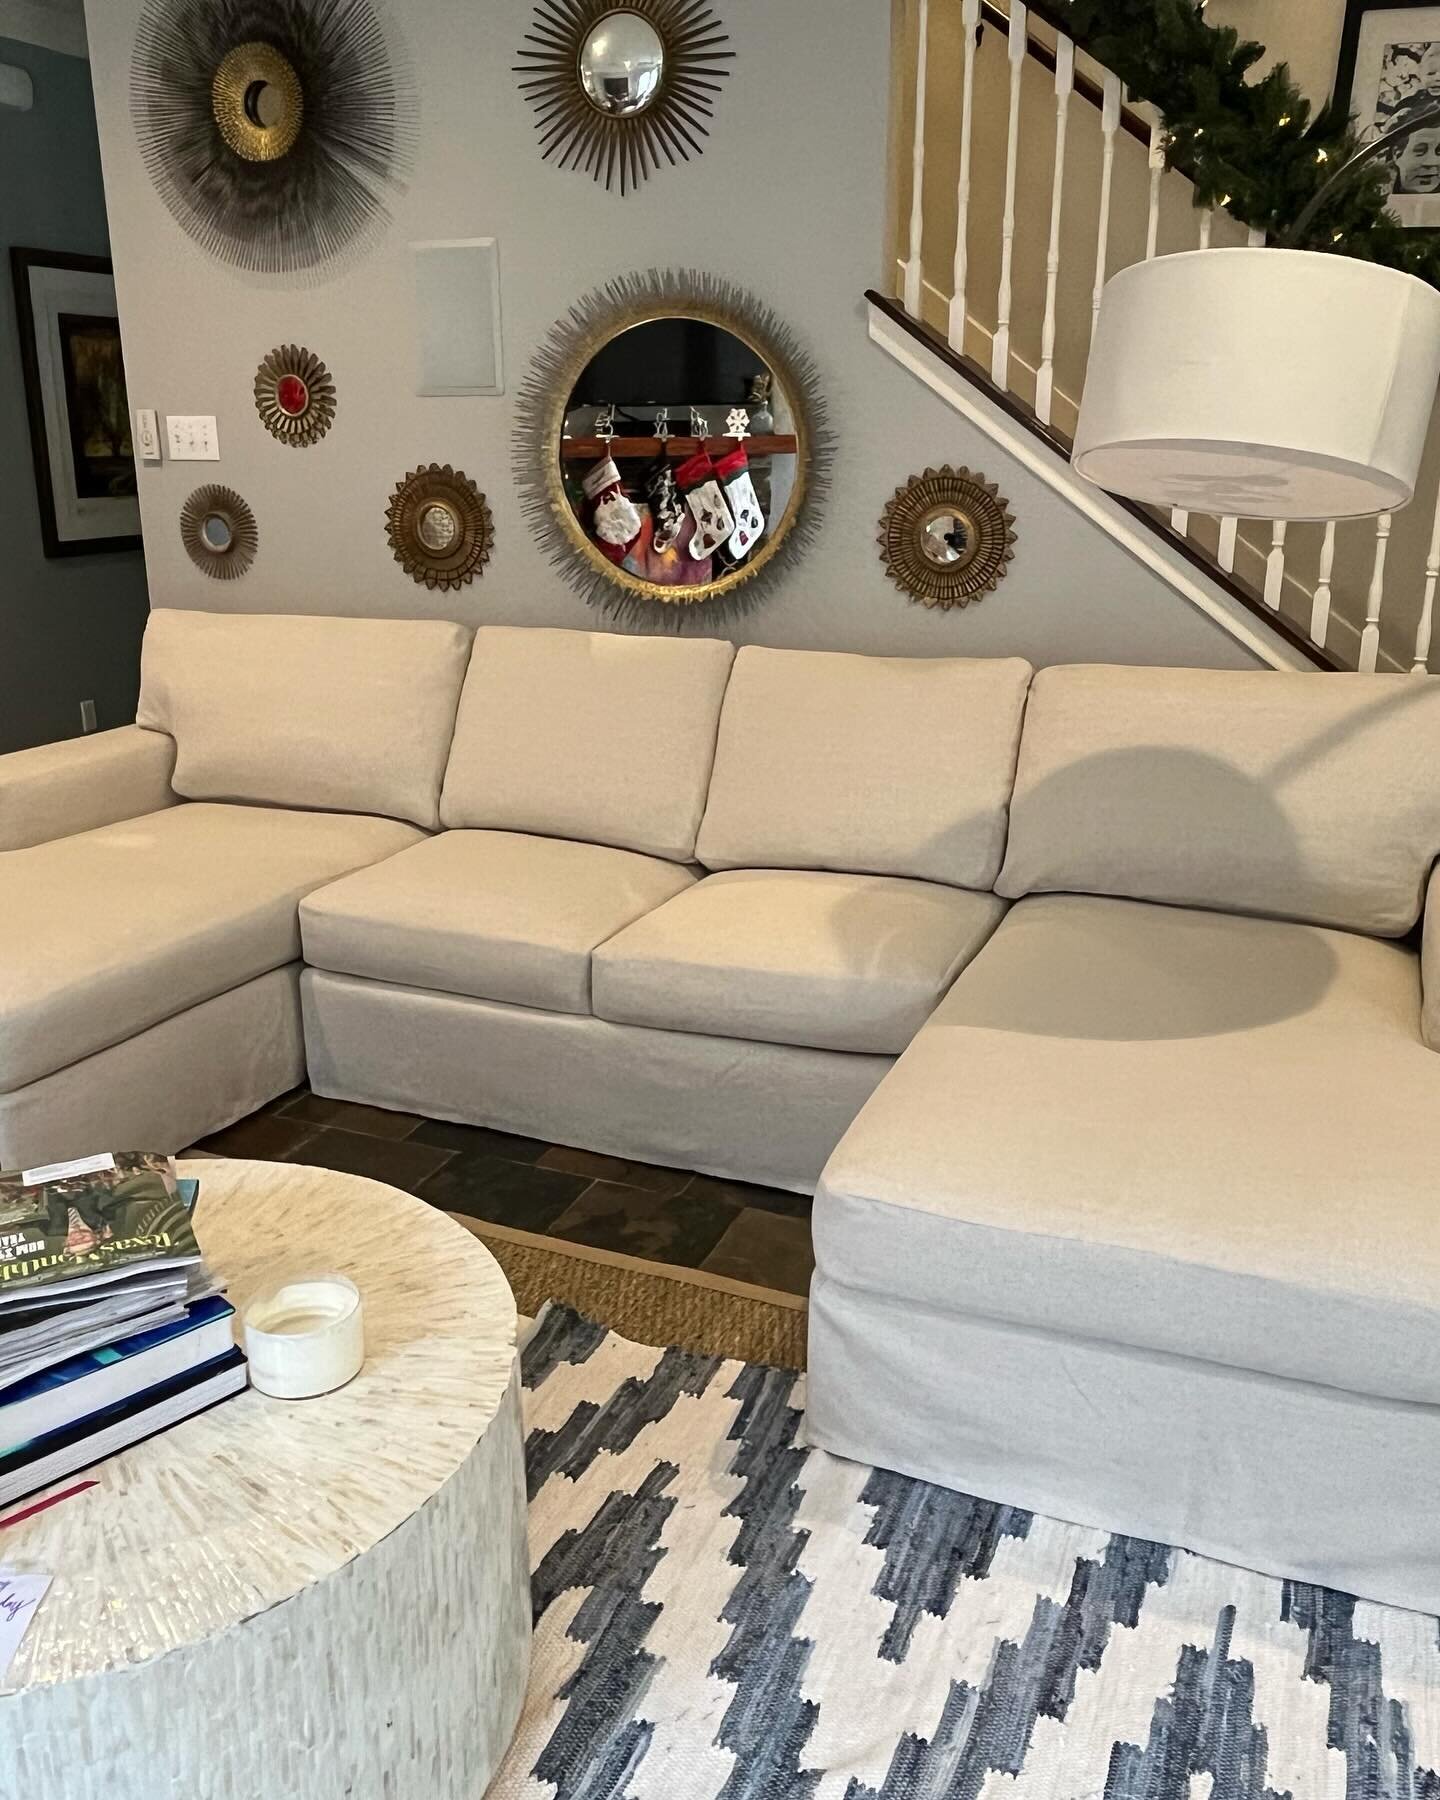 Simple sectional slipcover - a few before &amp; afters! 
&bull;
&bull;
&bull;
&bull;
&bull;
&bull;
&bull;
#austininteriors #customworkroom #custompillows #customsewingaustin #interiordesignaustin #slipworks #customslipcover #customcushions #outdoorcu